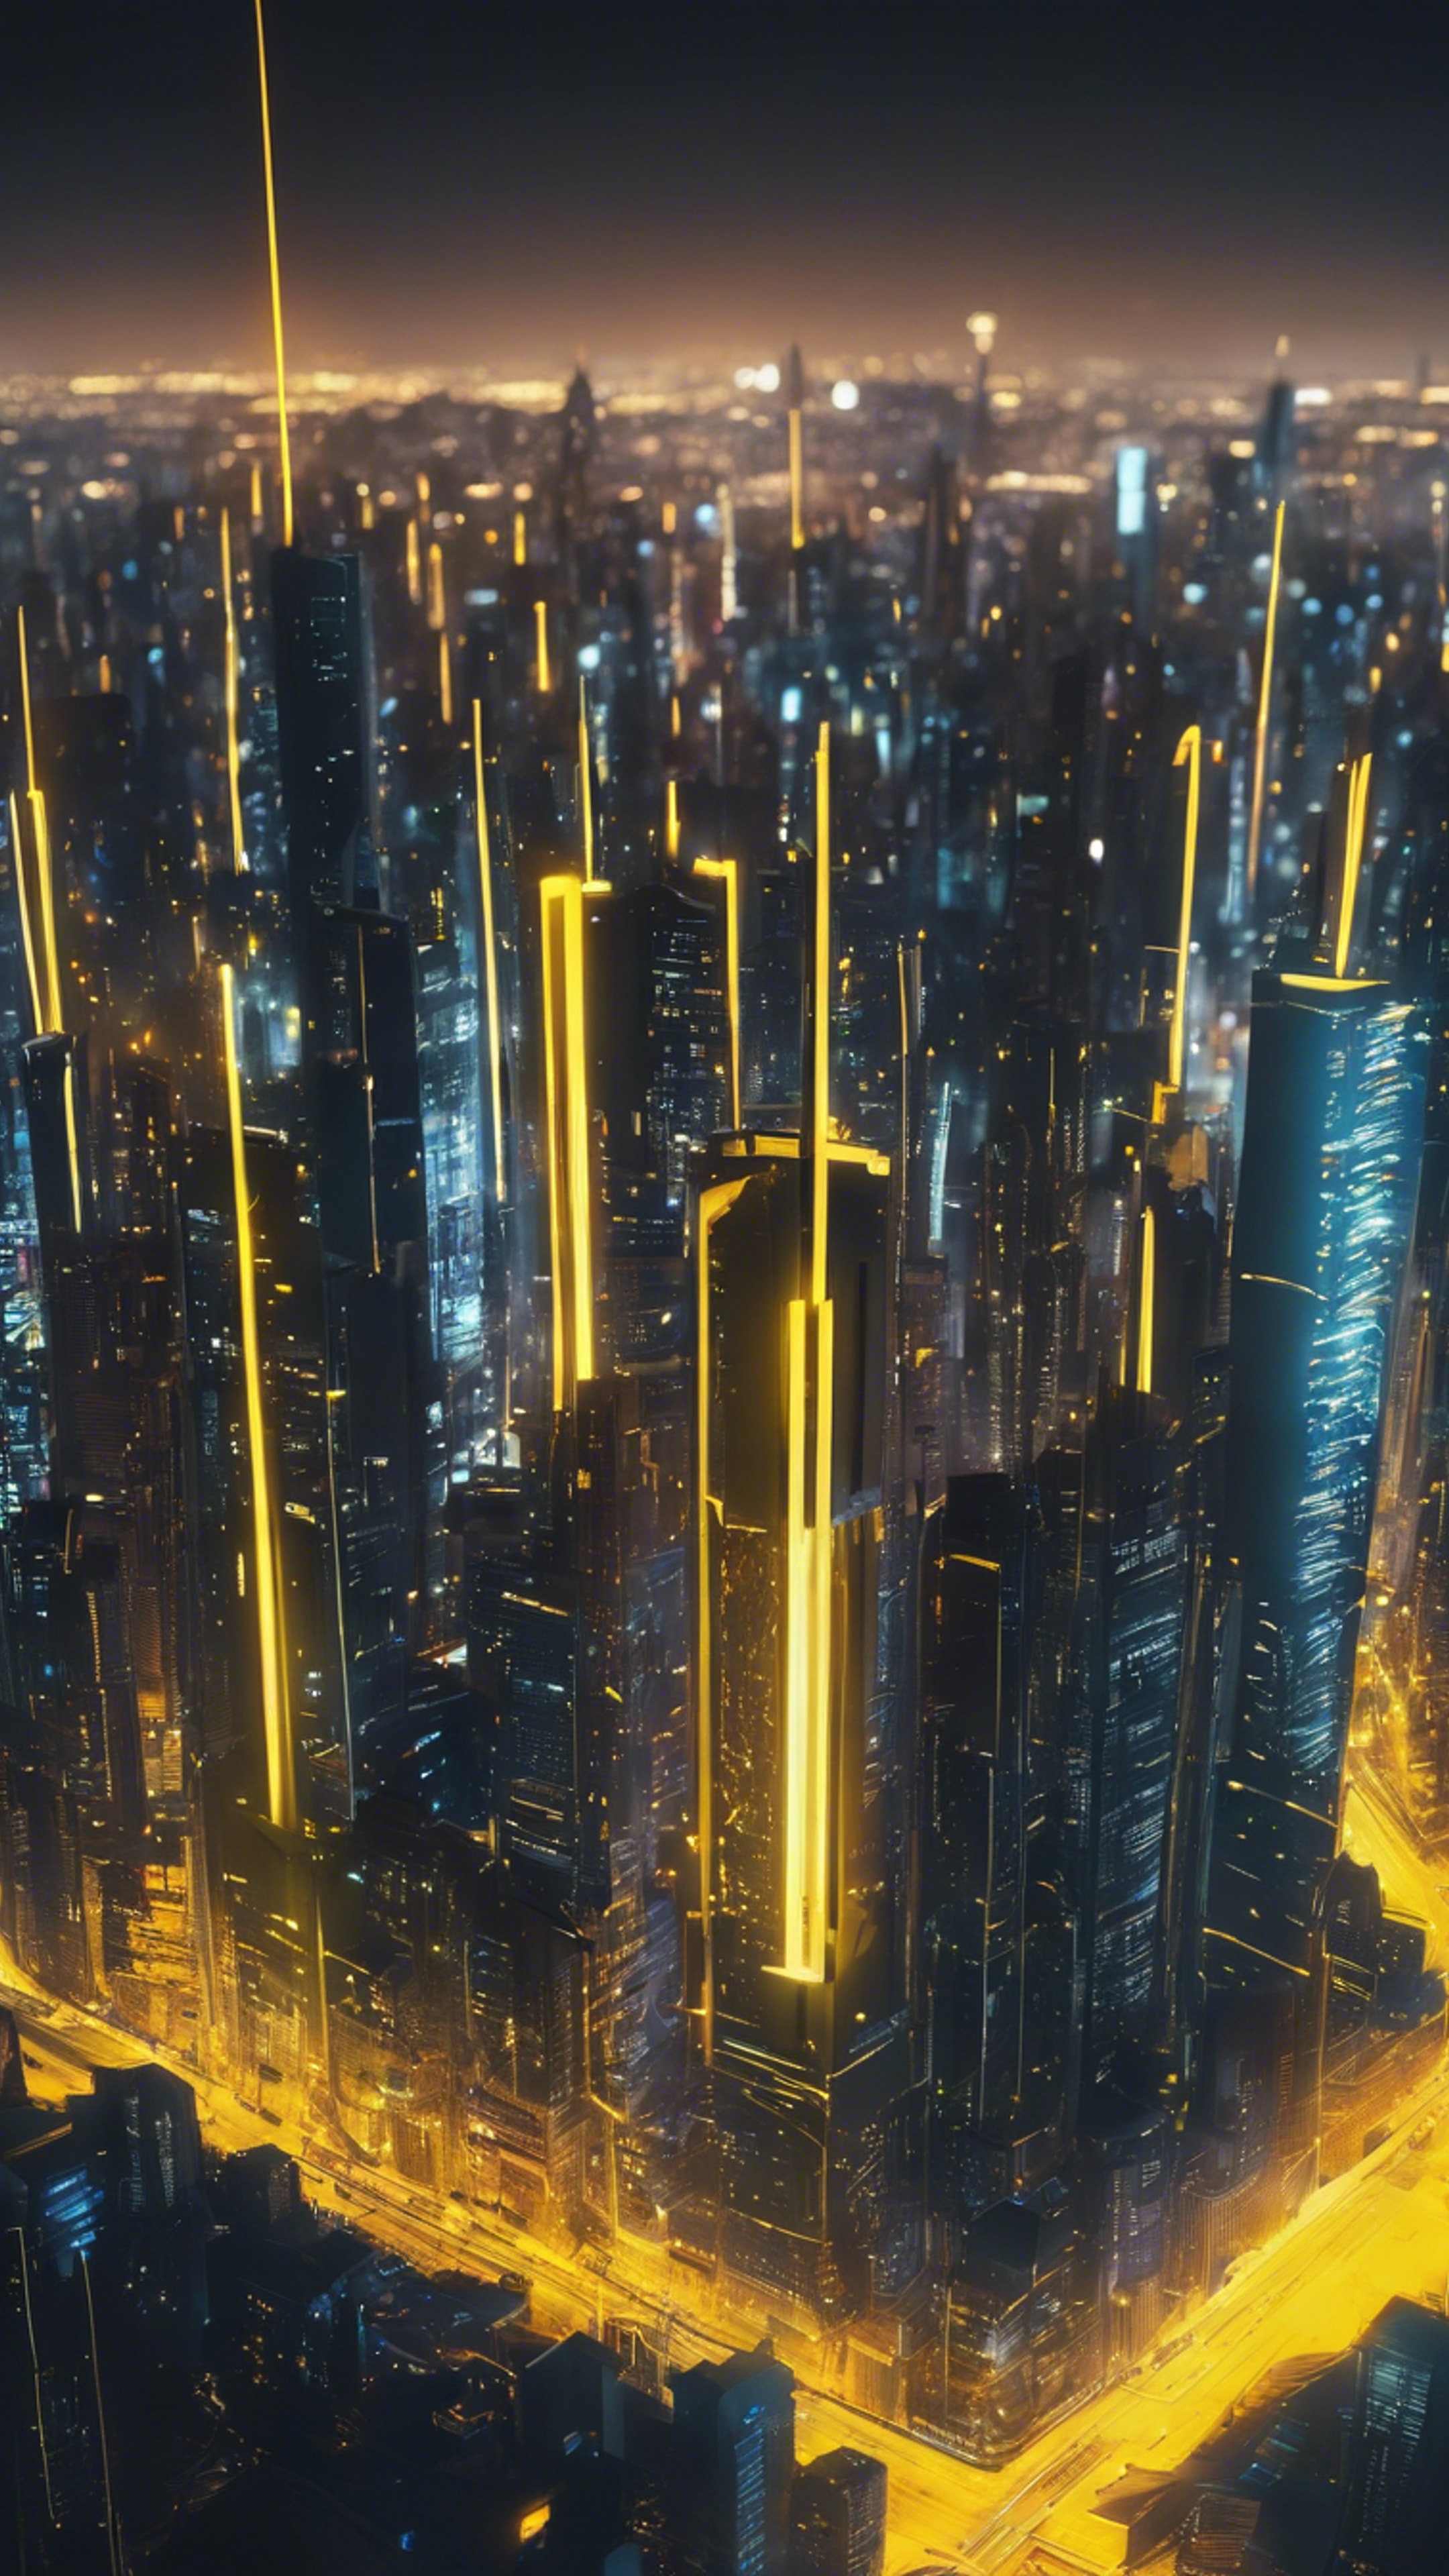 A towering futuristic cityscape highlighted by neon yellow lights under the night sky.壁紙[c2e95164cc7d435ab04c]